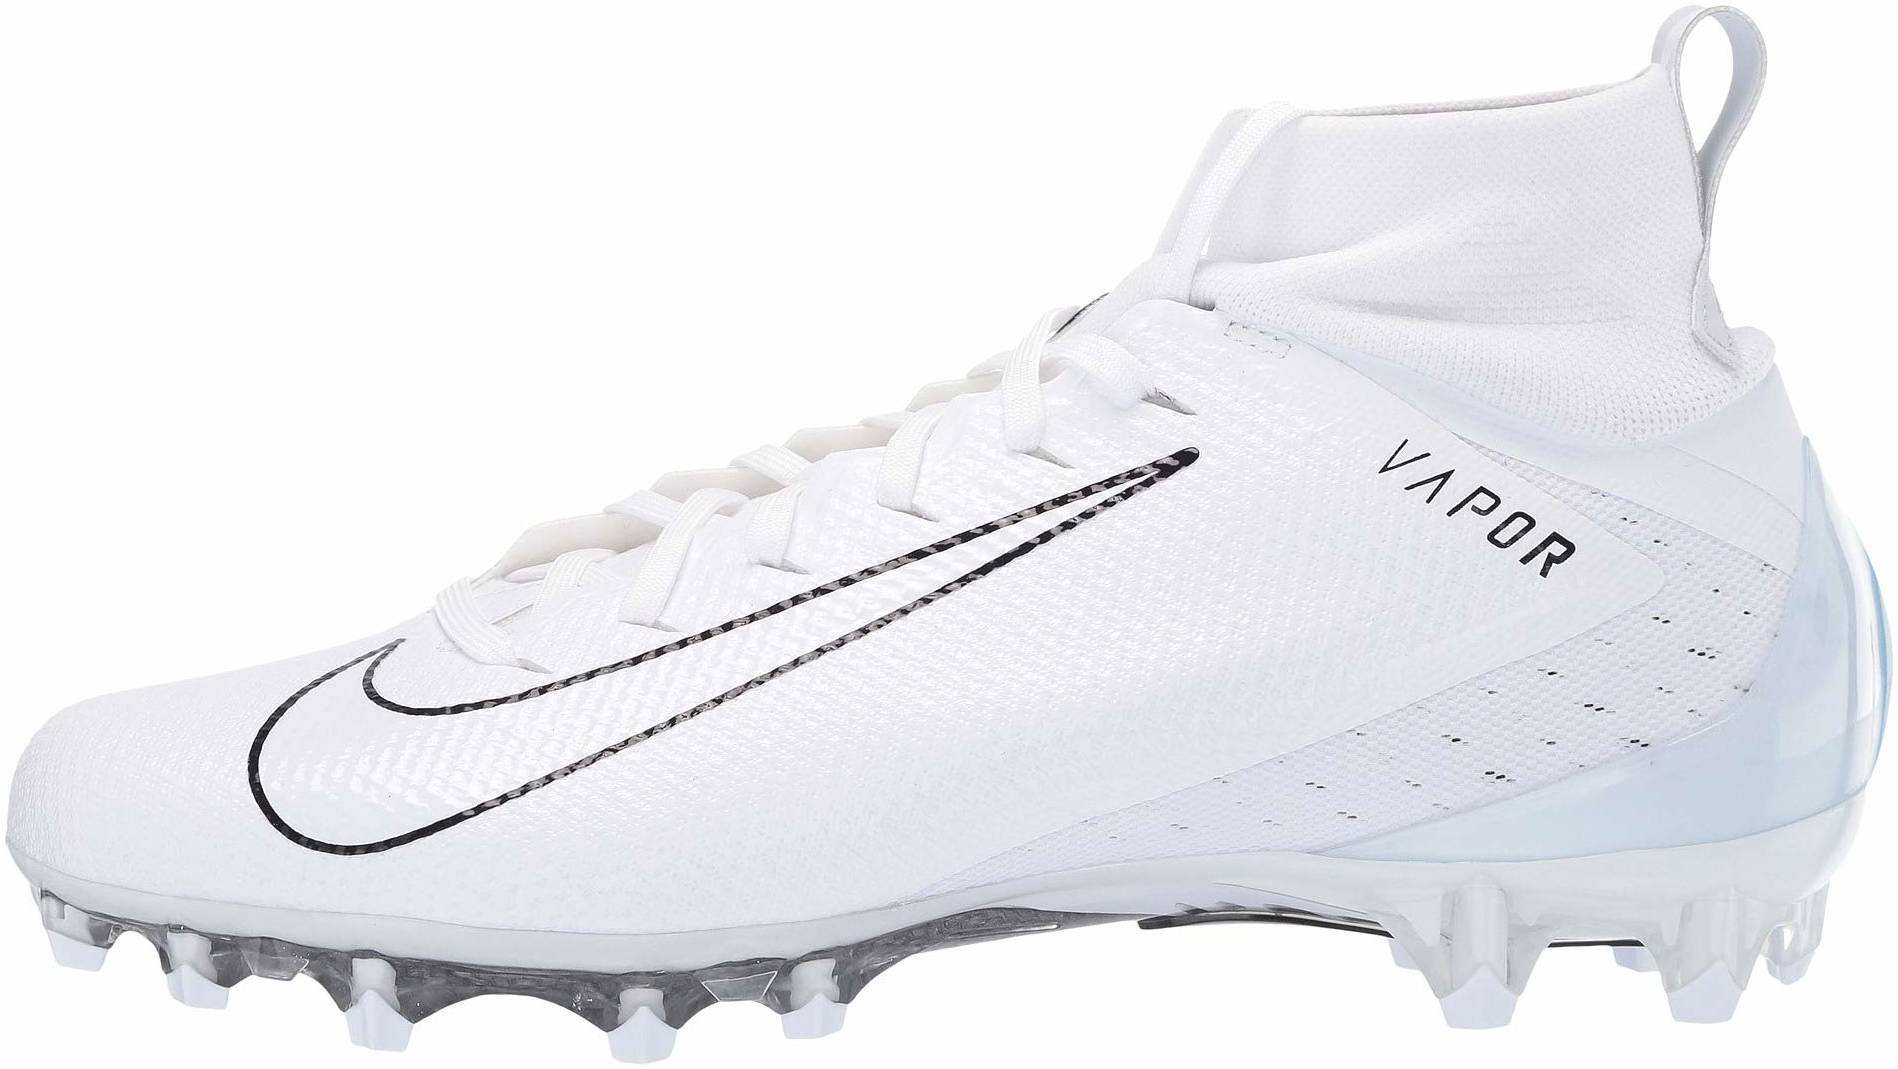 hostility jeans consensus white nike vapor football cleats, large reduction UP TO 67% OFF -  statehouse.gov.sl